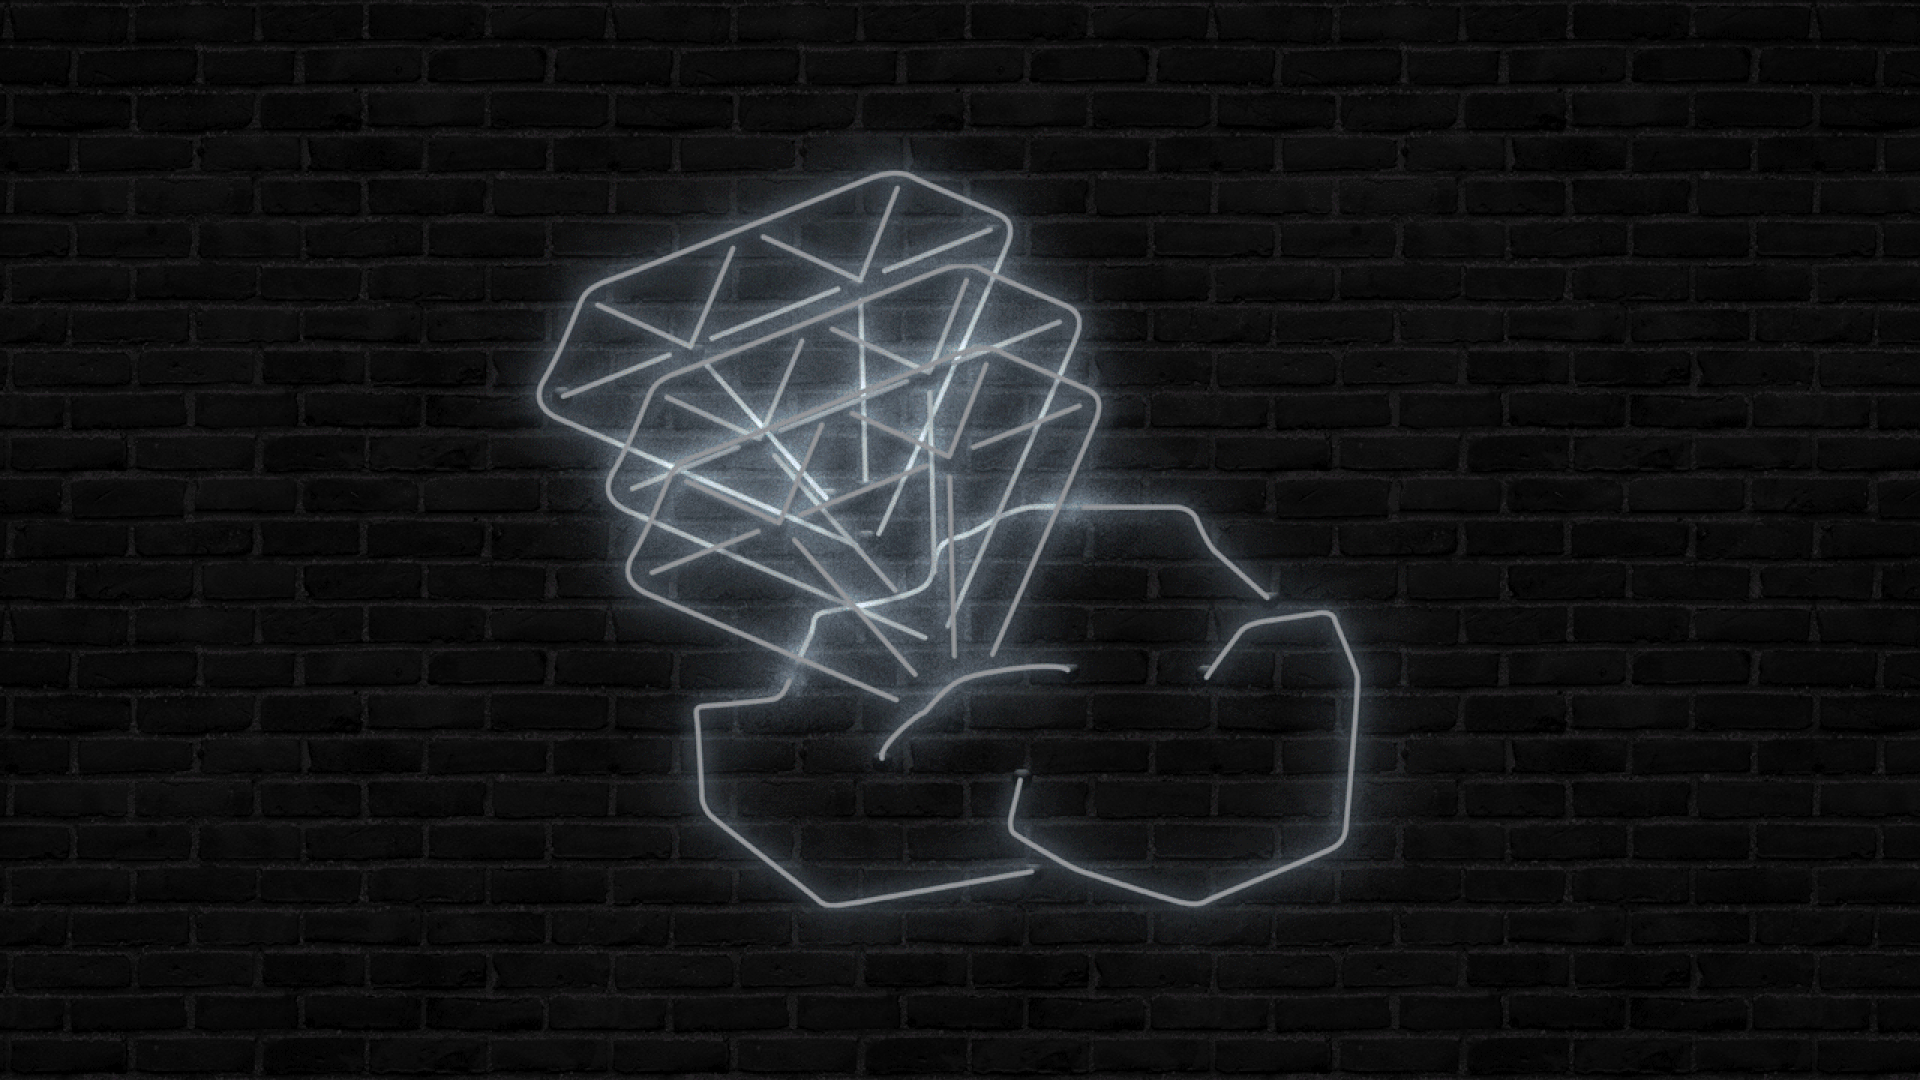 Animated illustration of a neon sign showing a diamond being pulled from a rock